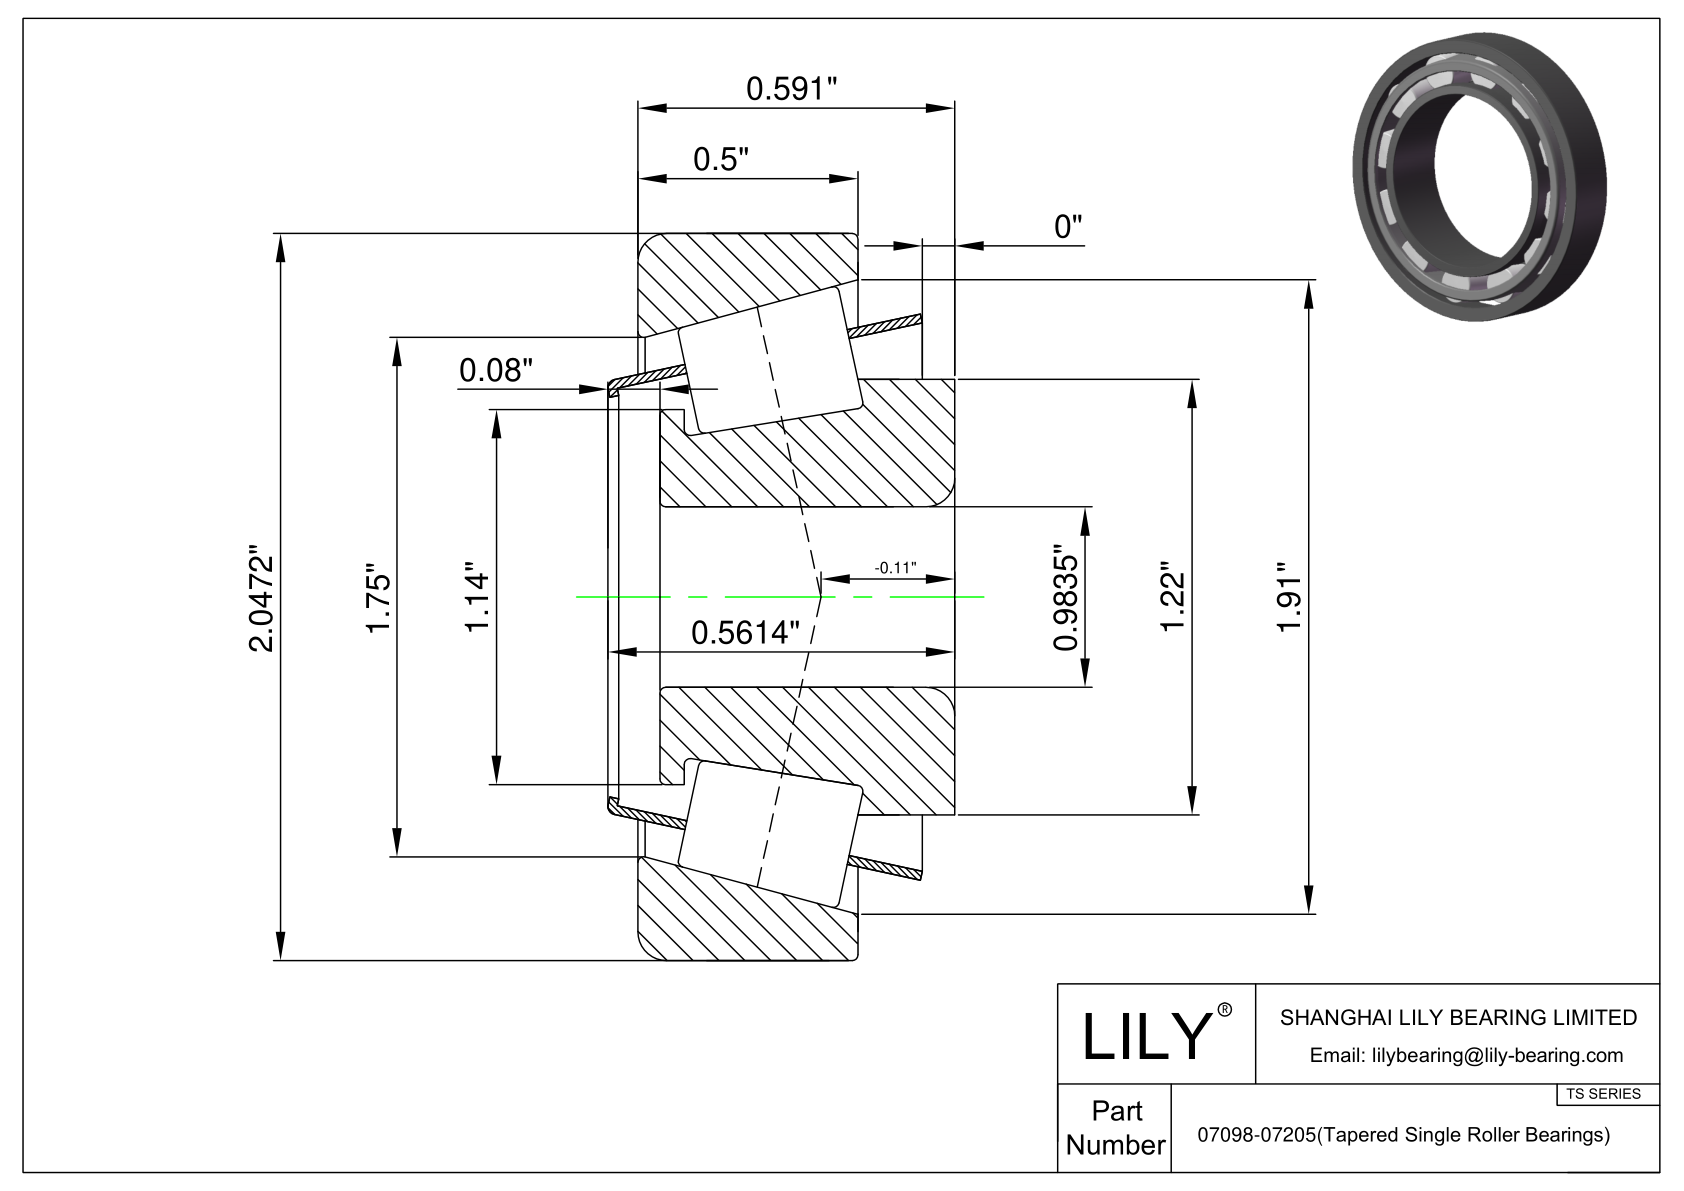 07098-07205 TS (Tapered Single Roller Bearings) (Imperial) cad drawing